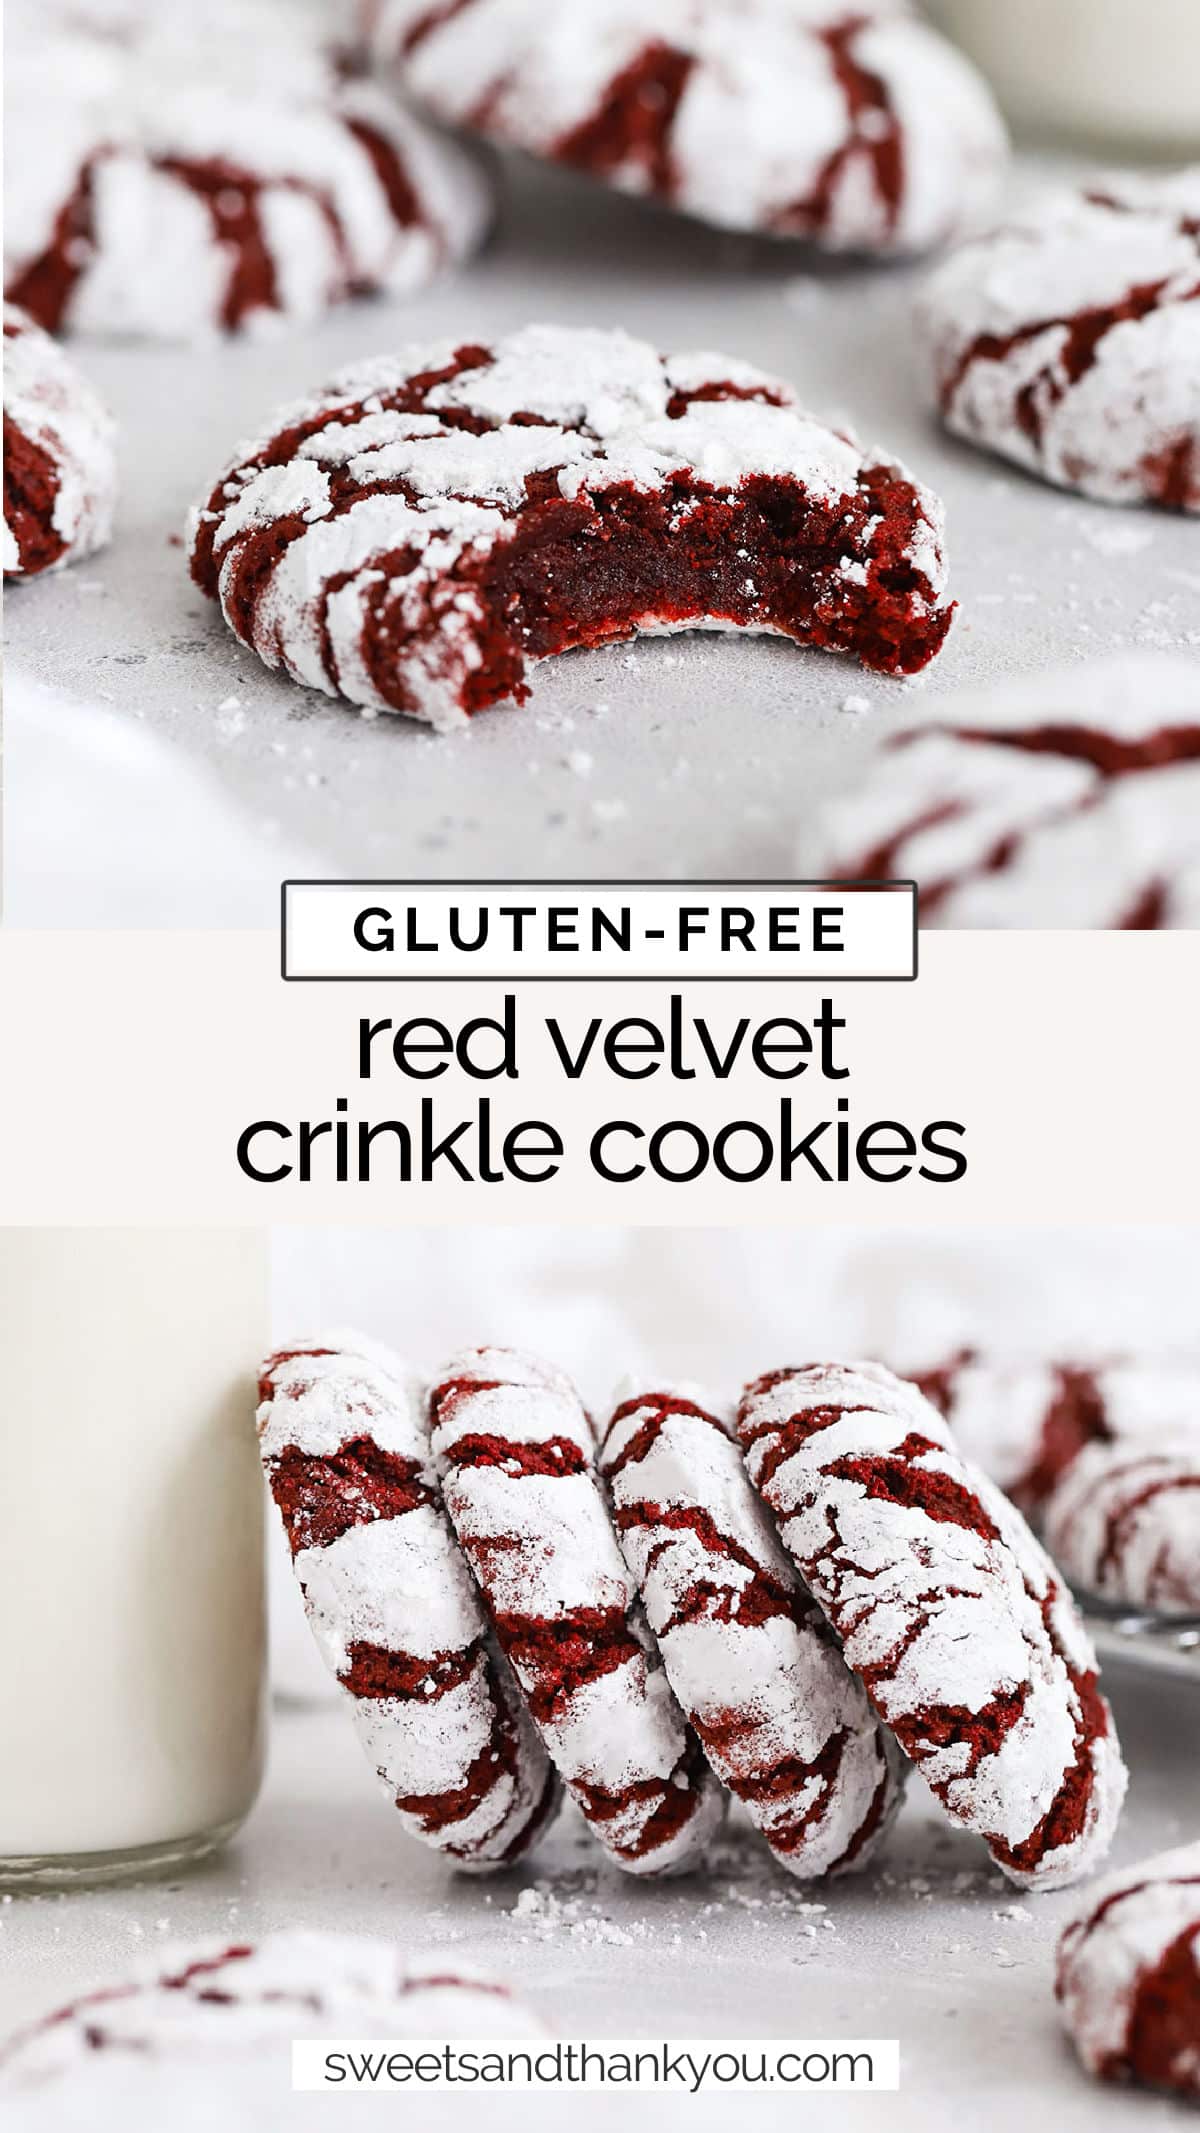 Our Gluten-Free Red Velvet Crinkle Cookies recipe is as yummy as it looks! Fudgy red velvet cookies rolled in powdered sugar for a pretty crackle effect. / gluten-free red velvet crinkles / gluten-free red velvet cookie recipe / gluten-free cookies / gluten free crinkle cookies / gluten free valentines cookies / gluten free holiday cookies / gluten-free christmas cookies / gluten-free cookie recipe